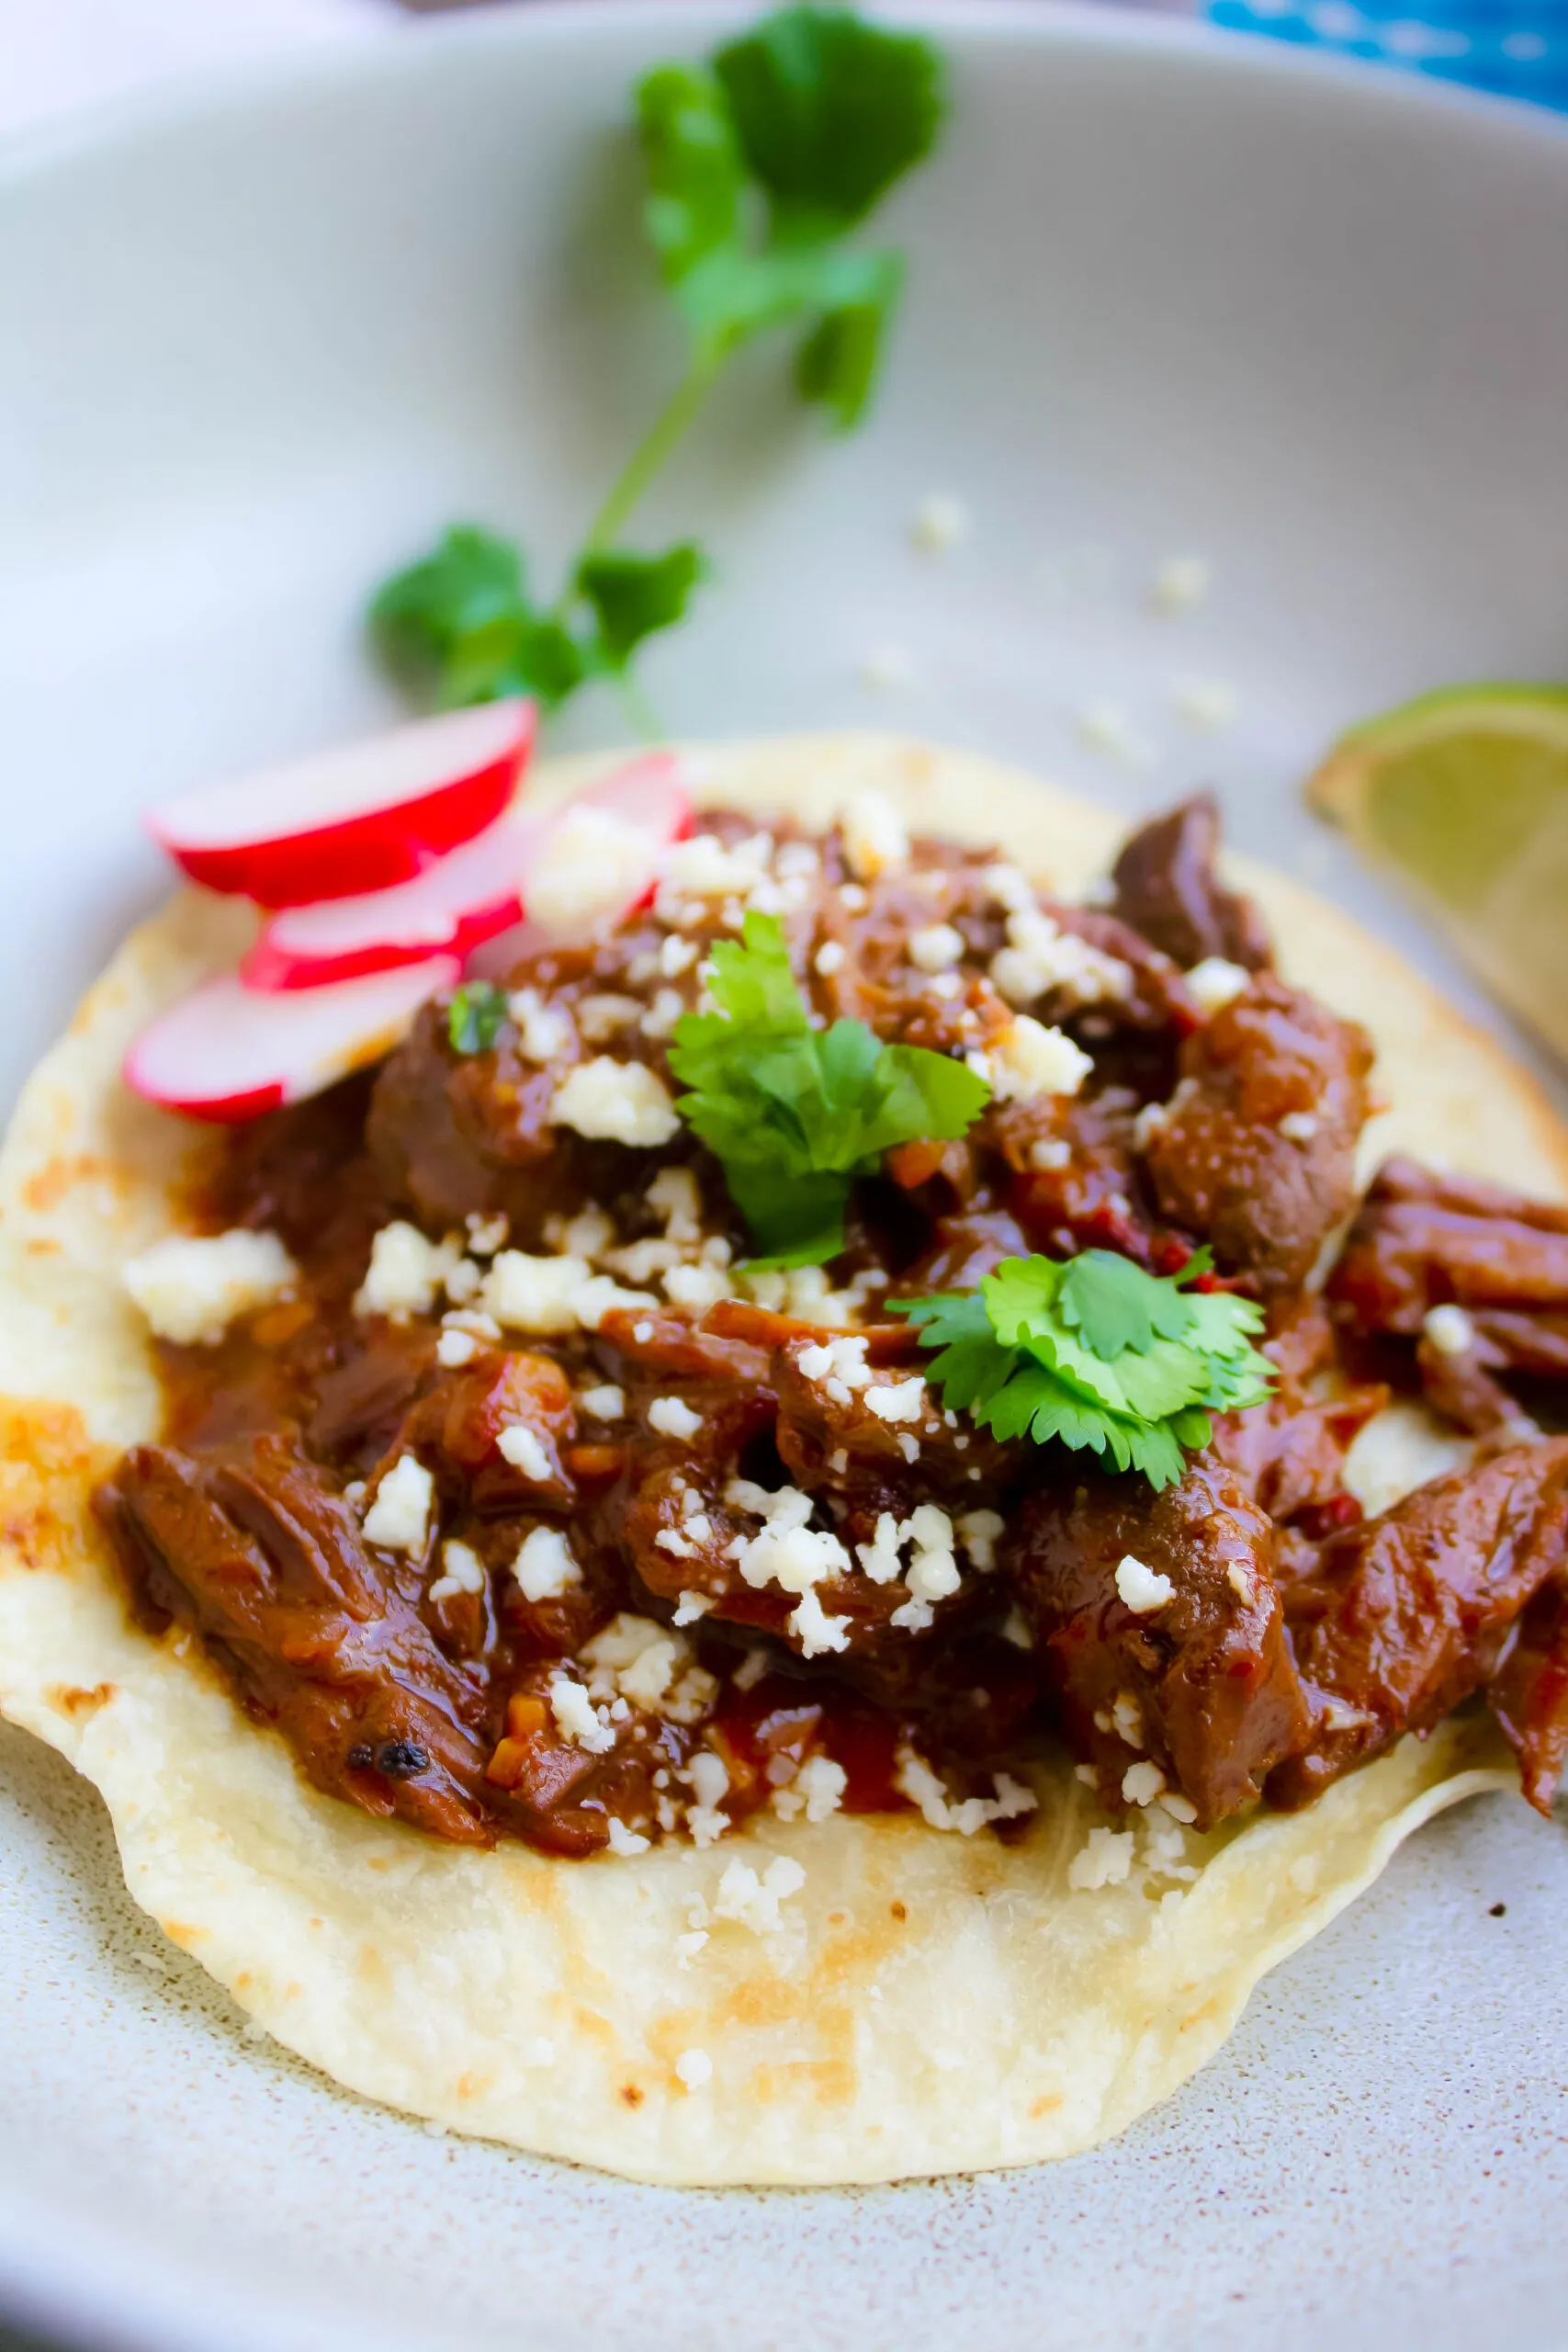 Chile Colorado Tacos are filling, flavorful, and they make a fabulous meal!